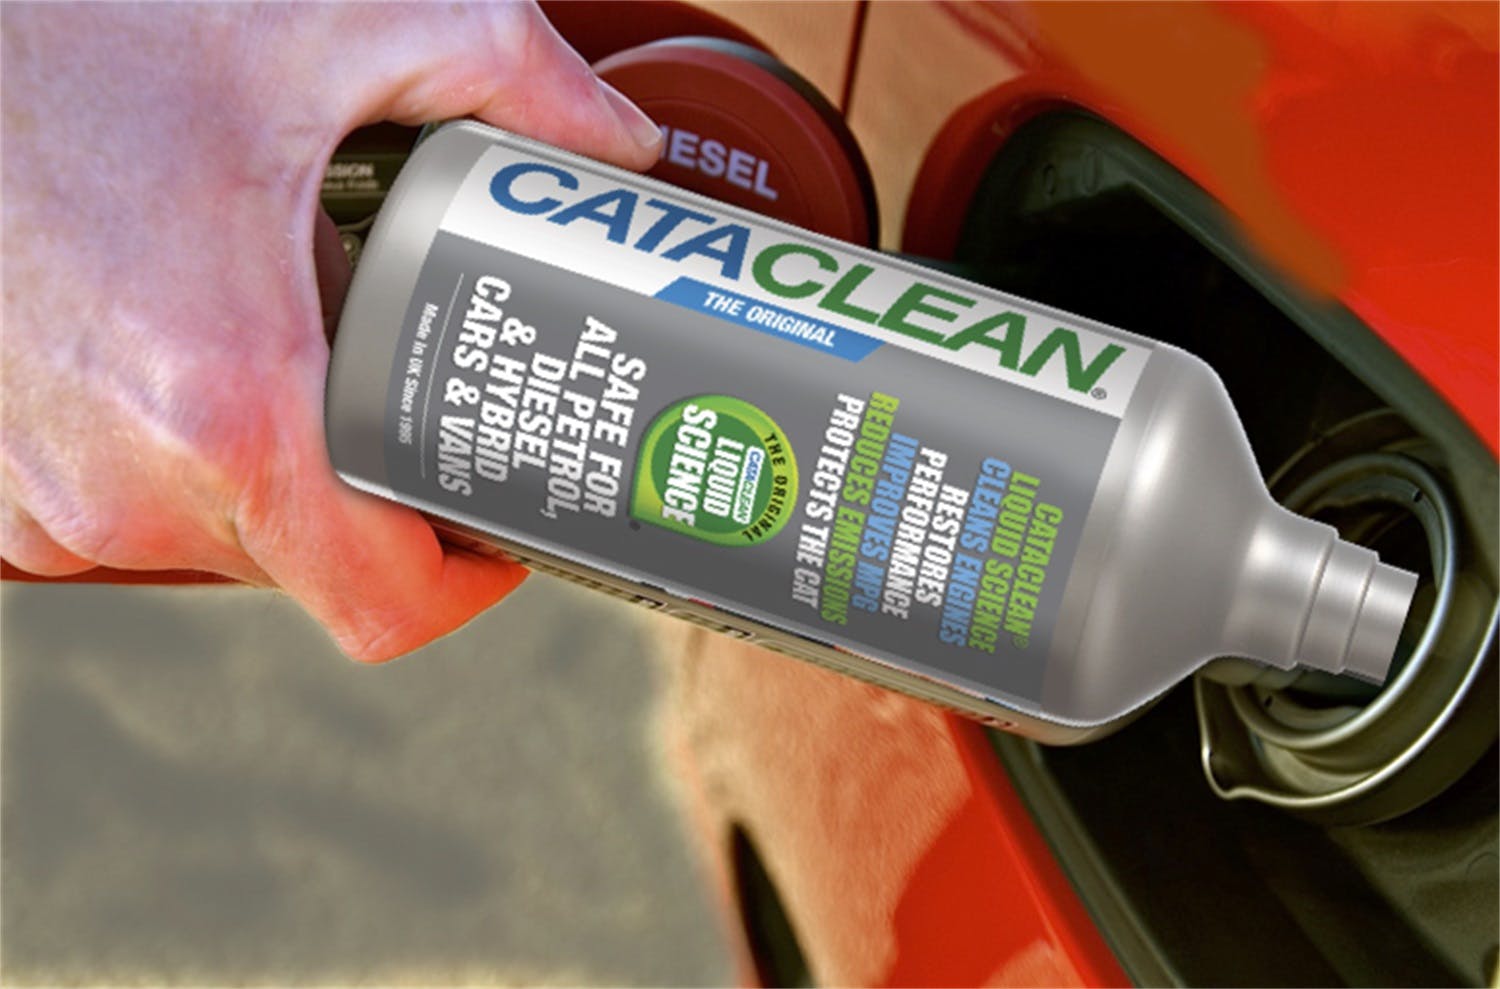 CataClean 120009CAT CATACLEAN- 5L FUEL AND EXHAUST SYSTEM CL